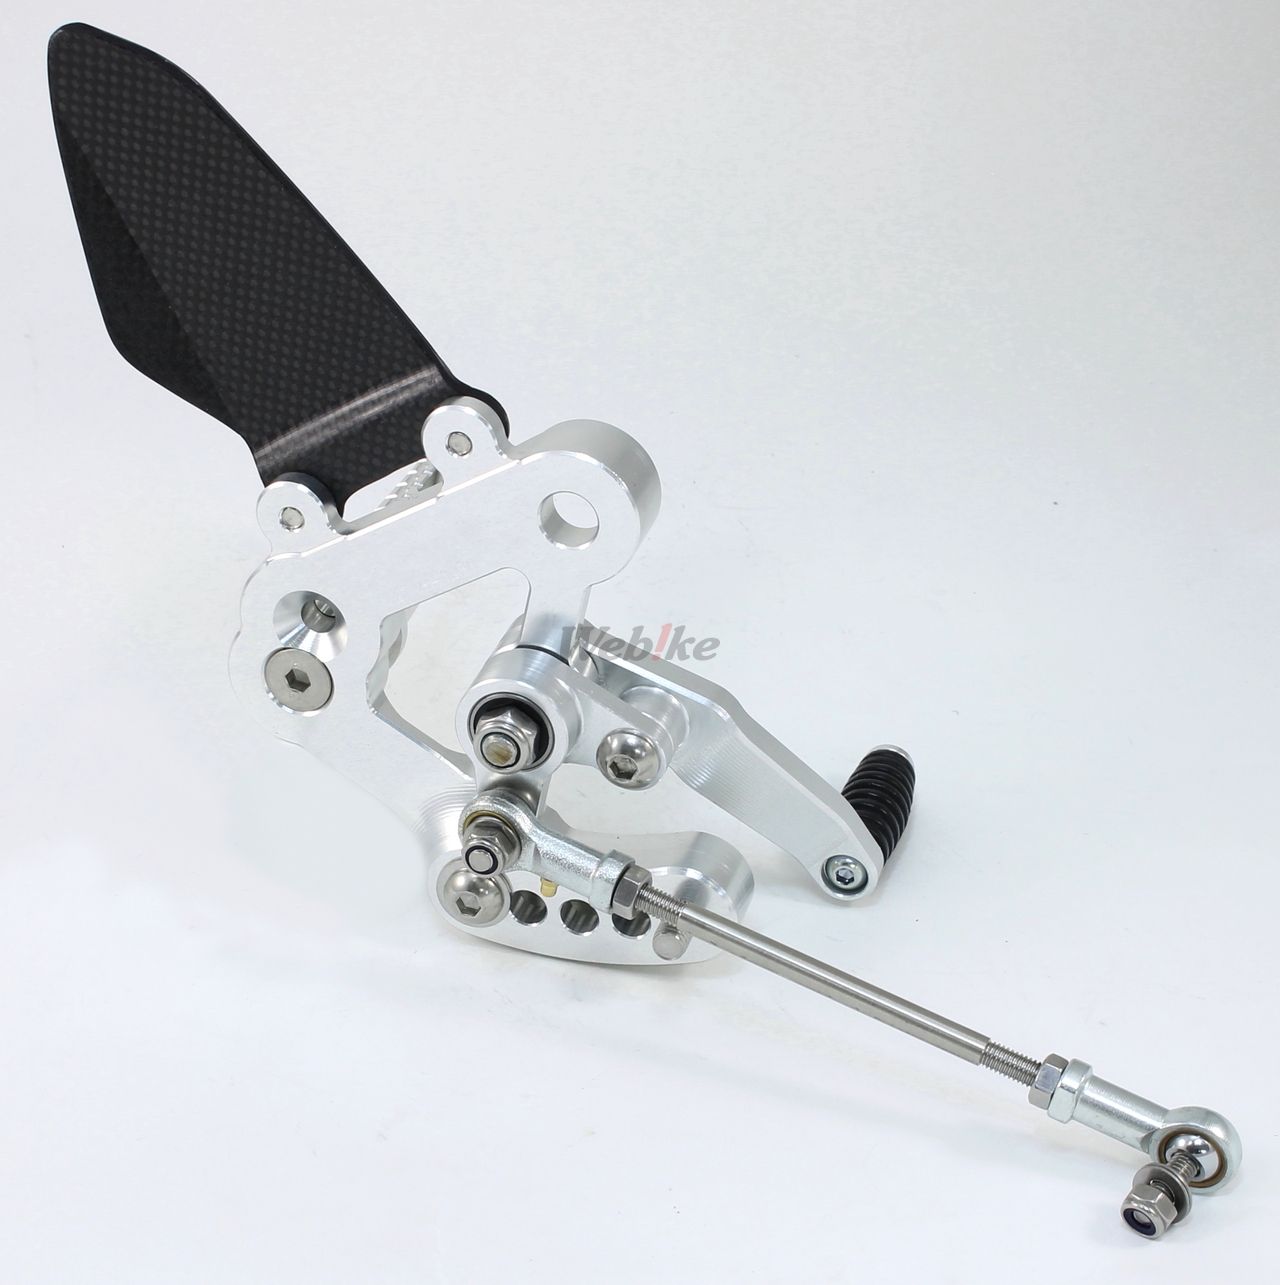 【TYGA PERFORMANCE】Racing Rear Set Kit, Adjustable, Silver with Silver Slot Cover, MSX125 Grom - Webike Thailand